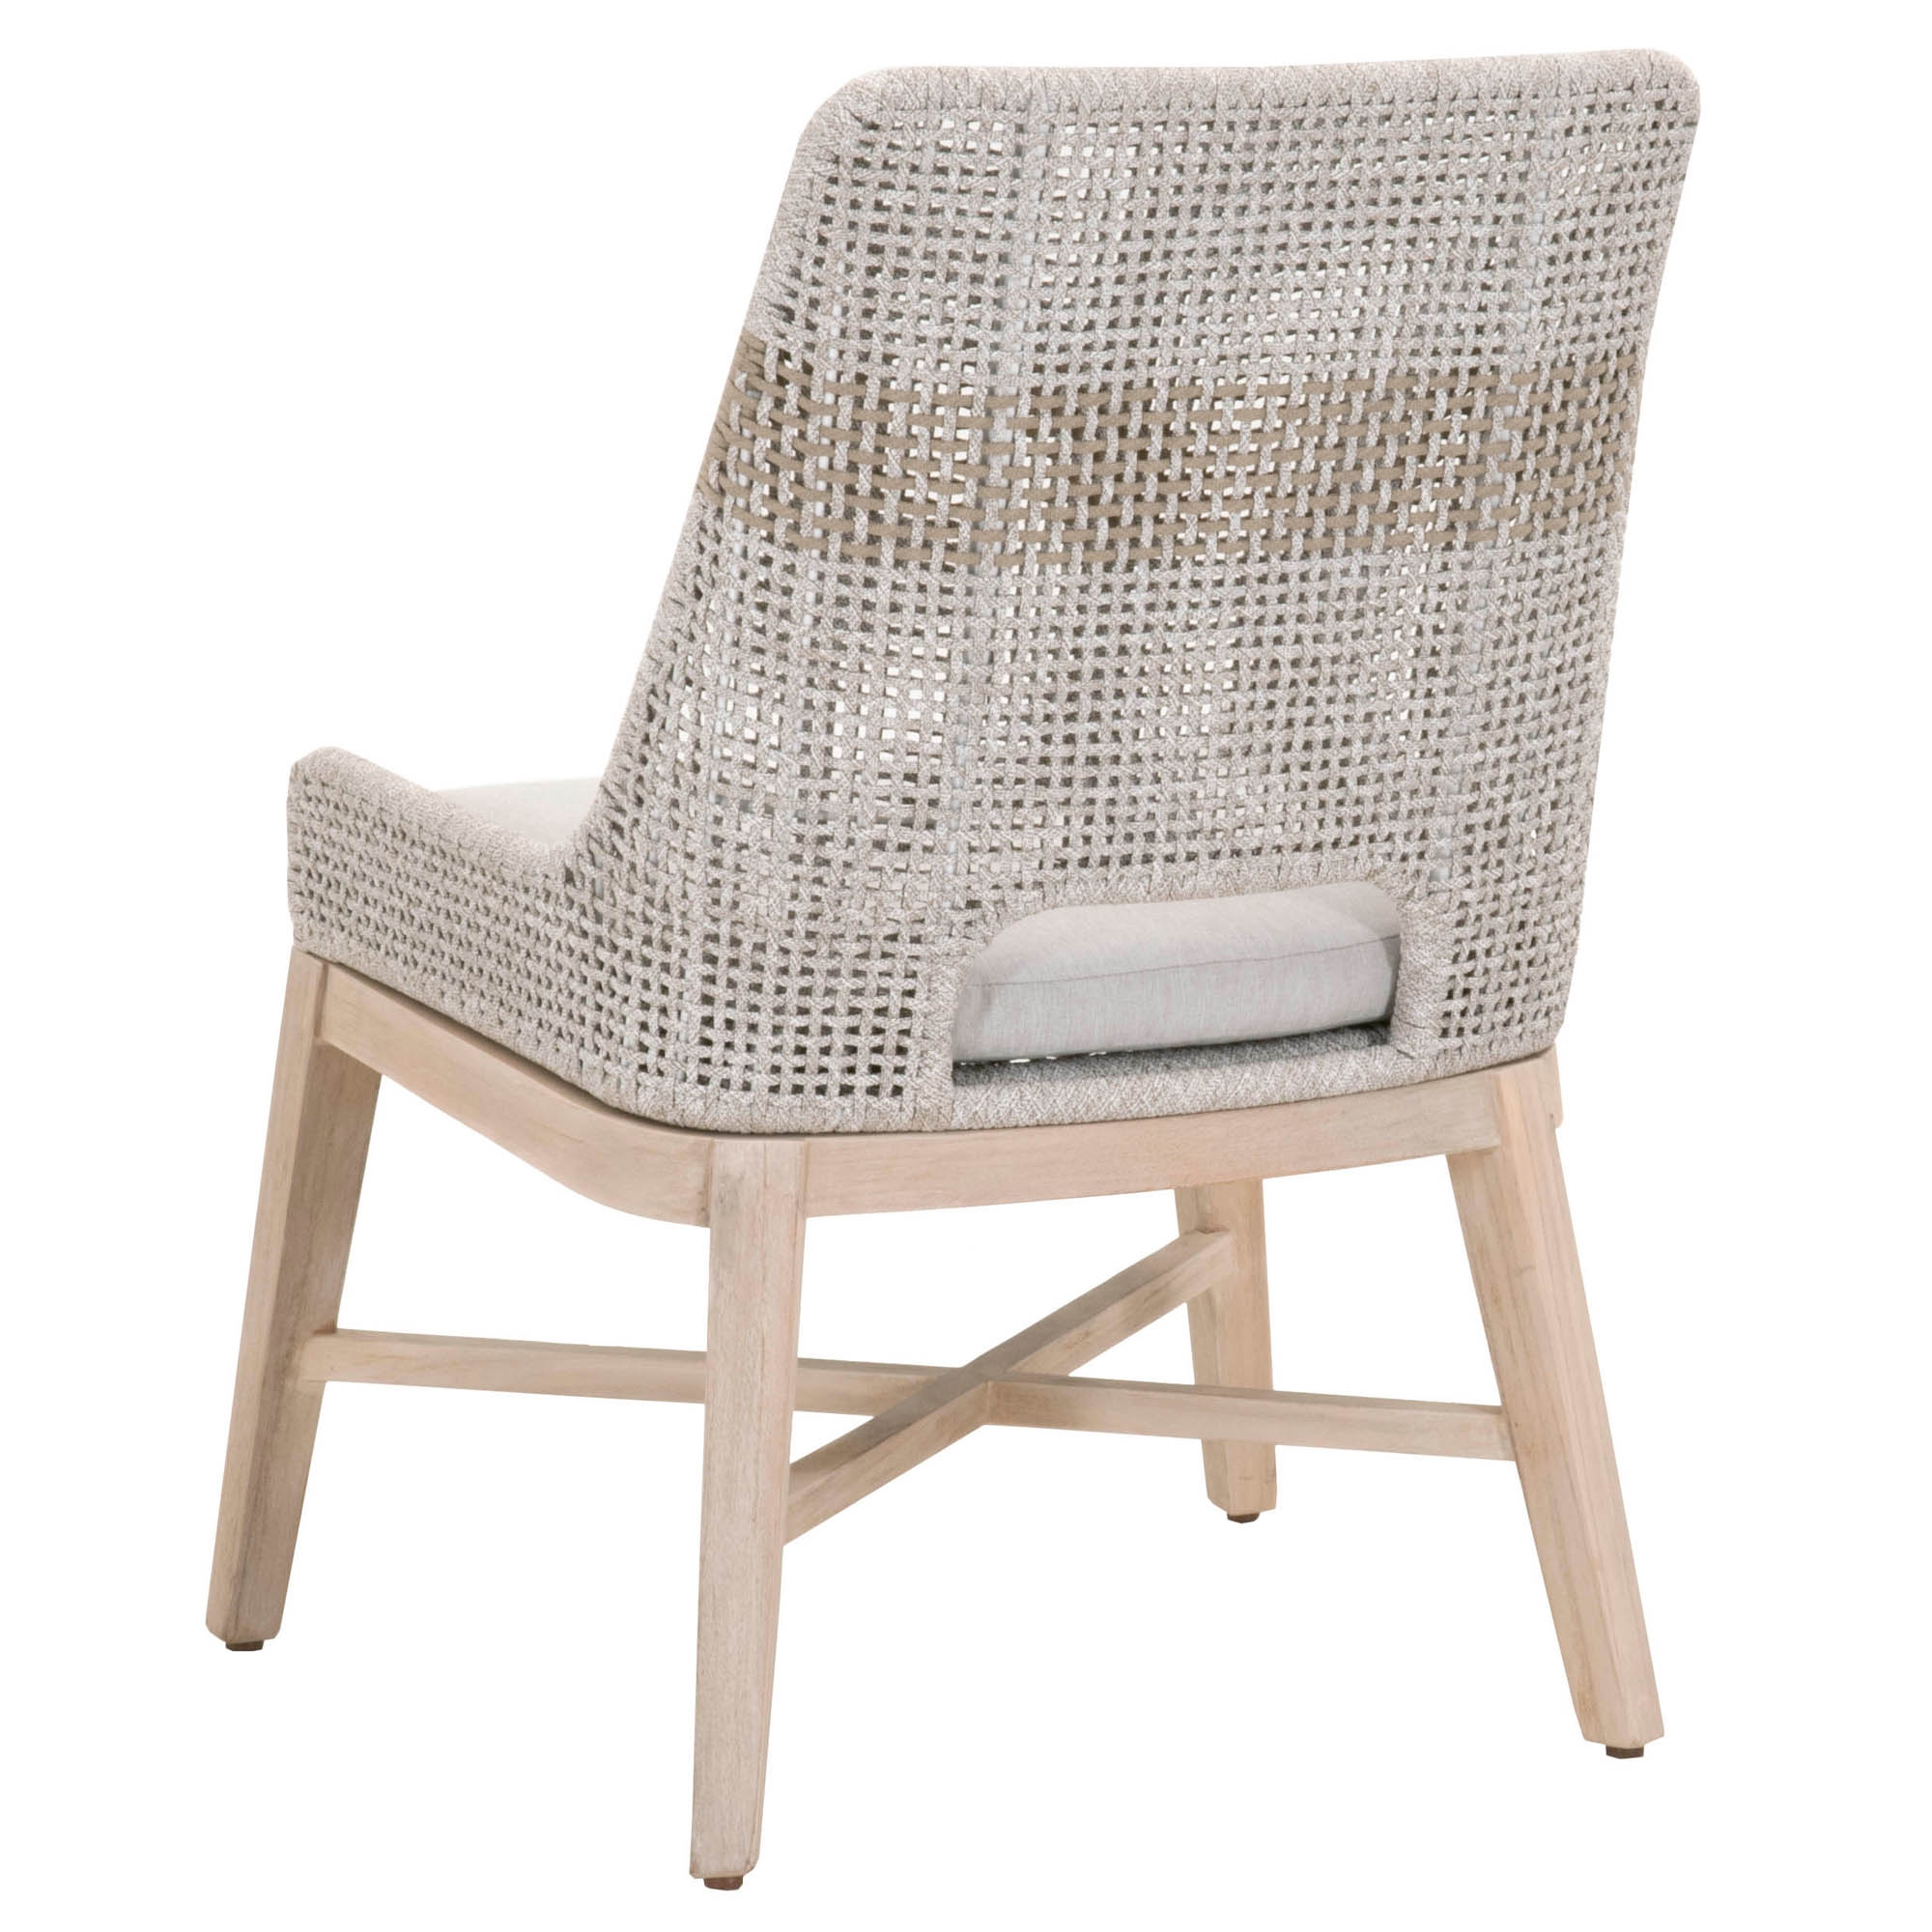 Tapestry Outdoor Dining Chair, Gray, Set of 2 - Image 3